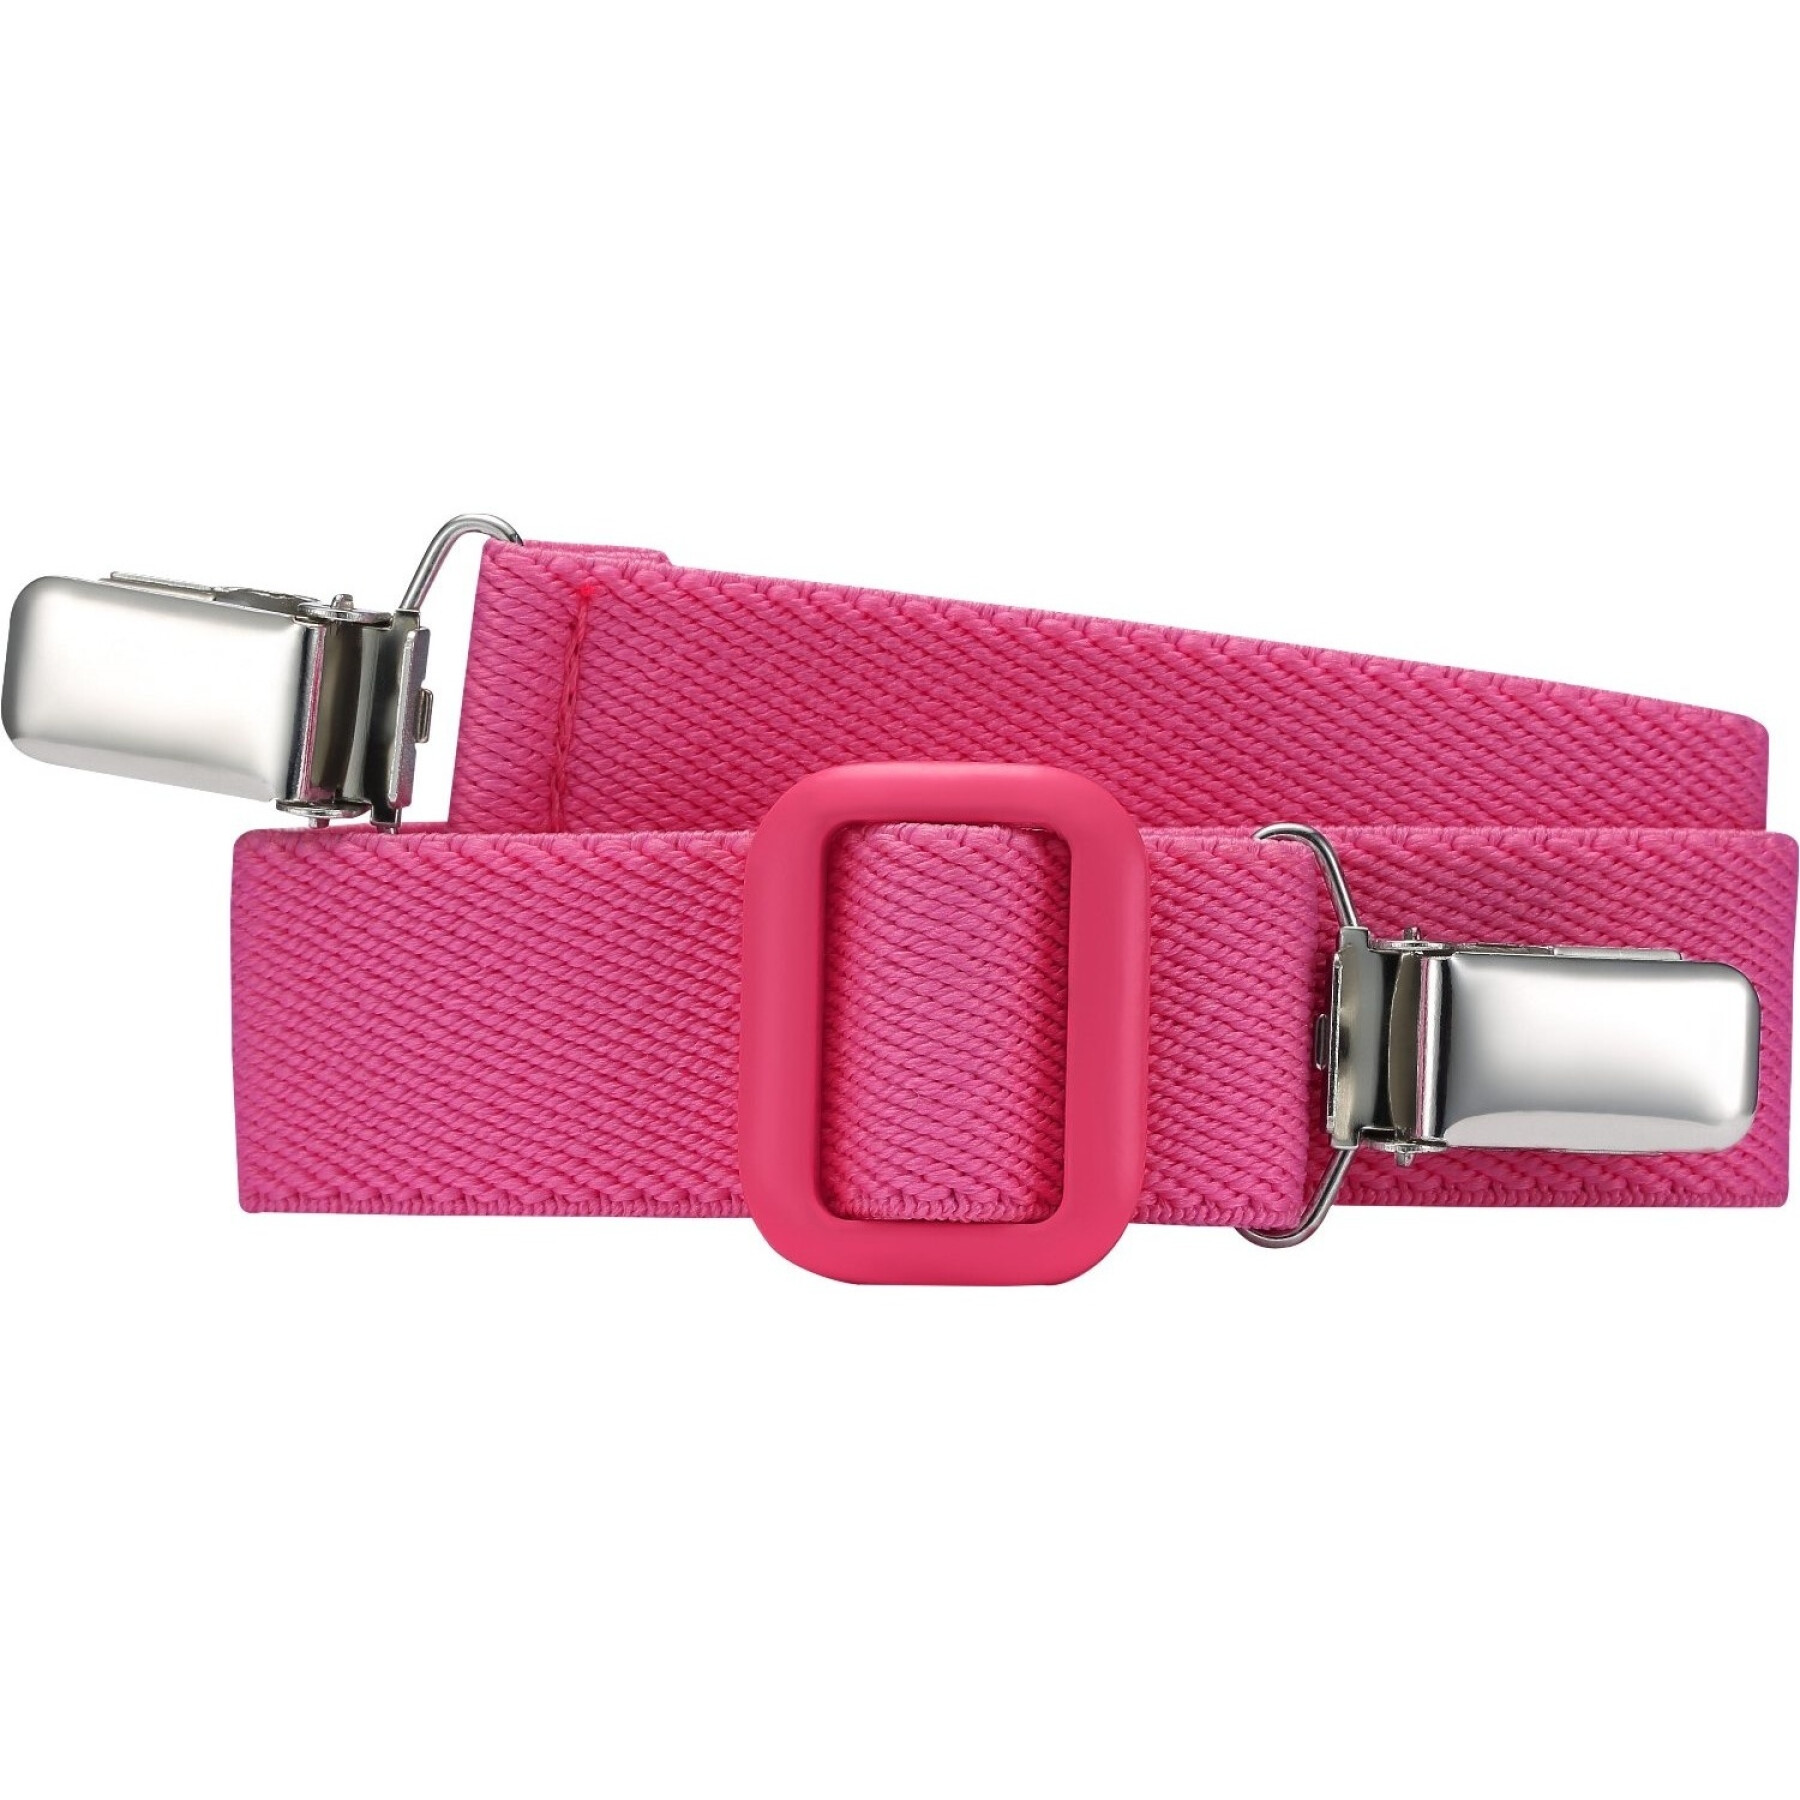 Plain elastic belt with baby clip Playshoes